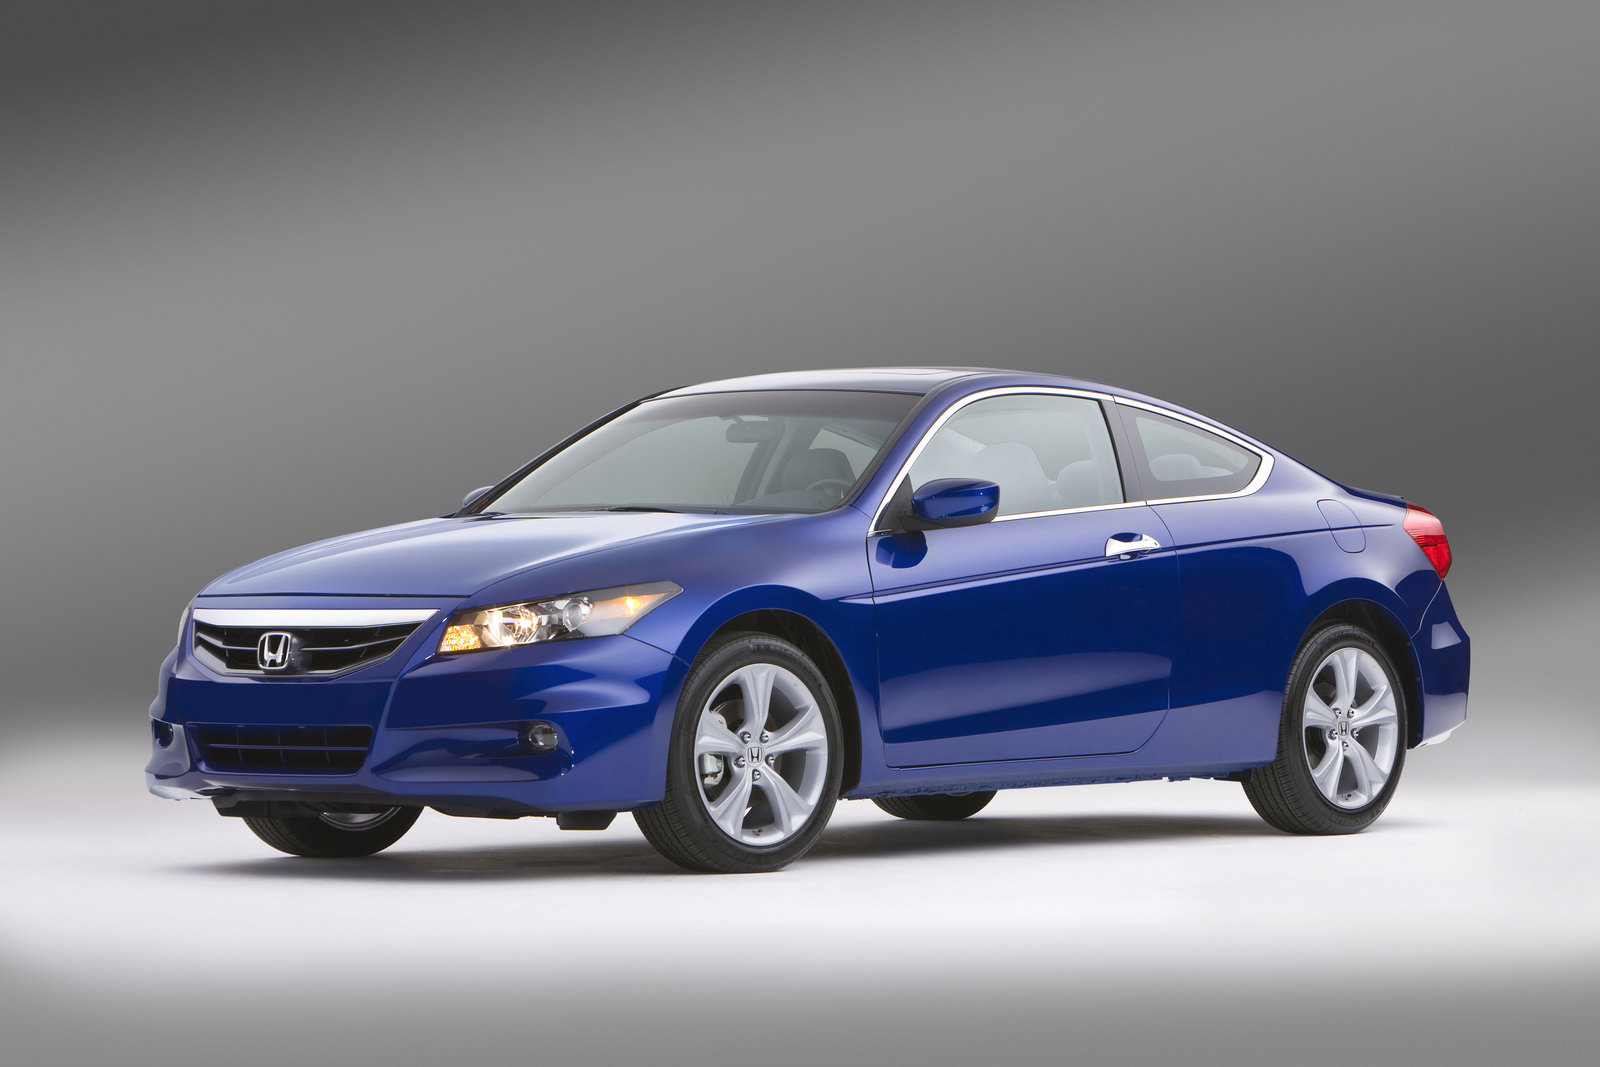 Preview: 2011 Honda Accord Coupe